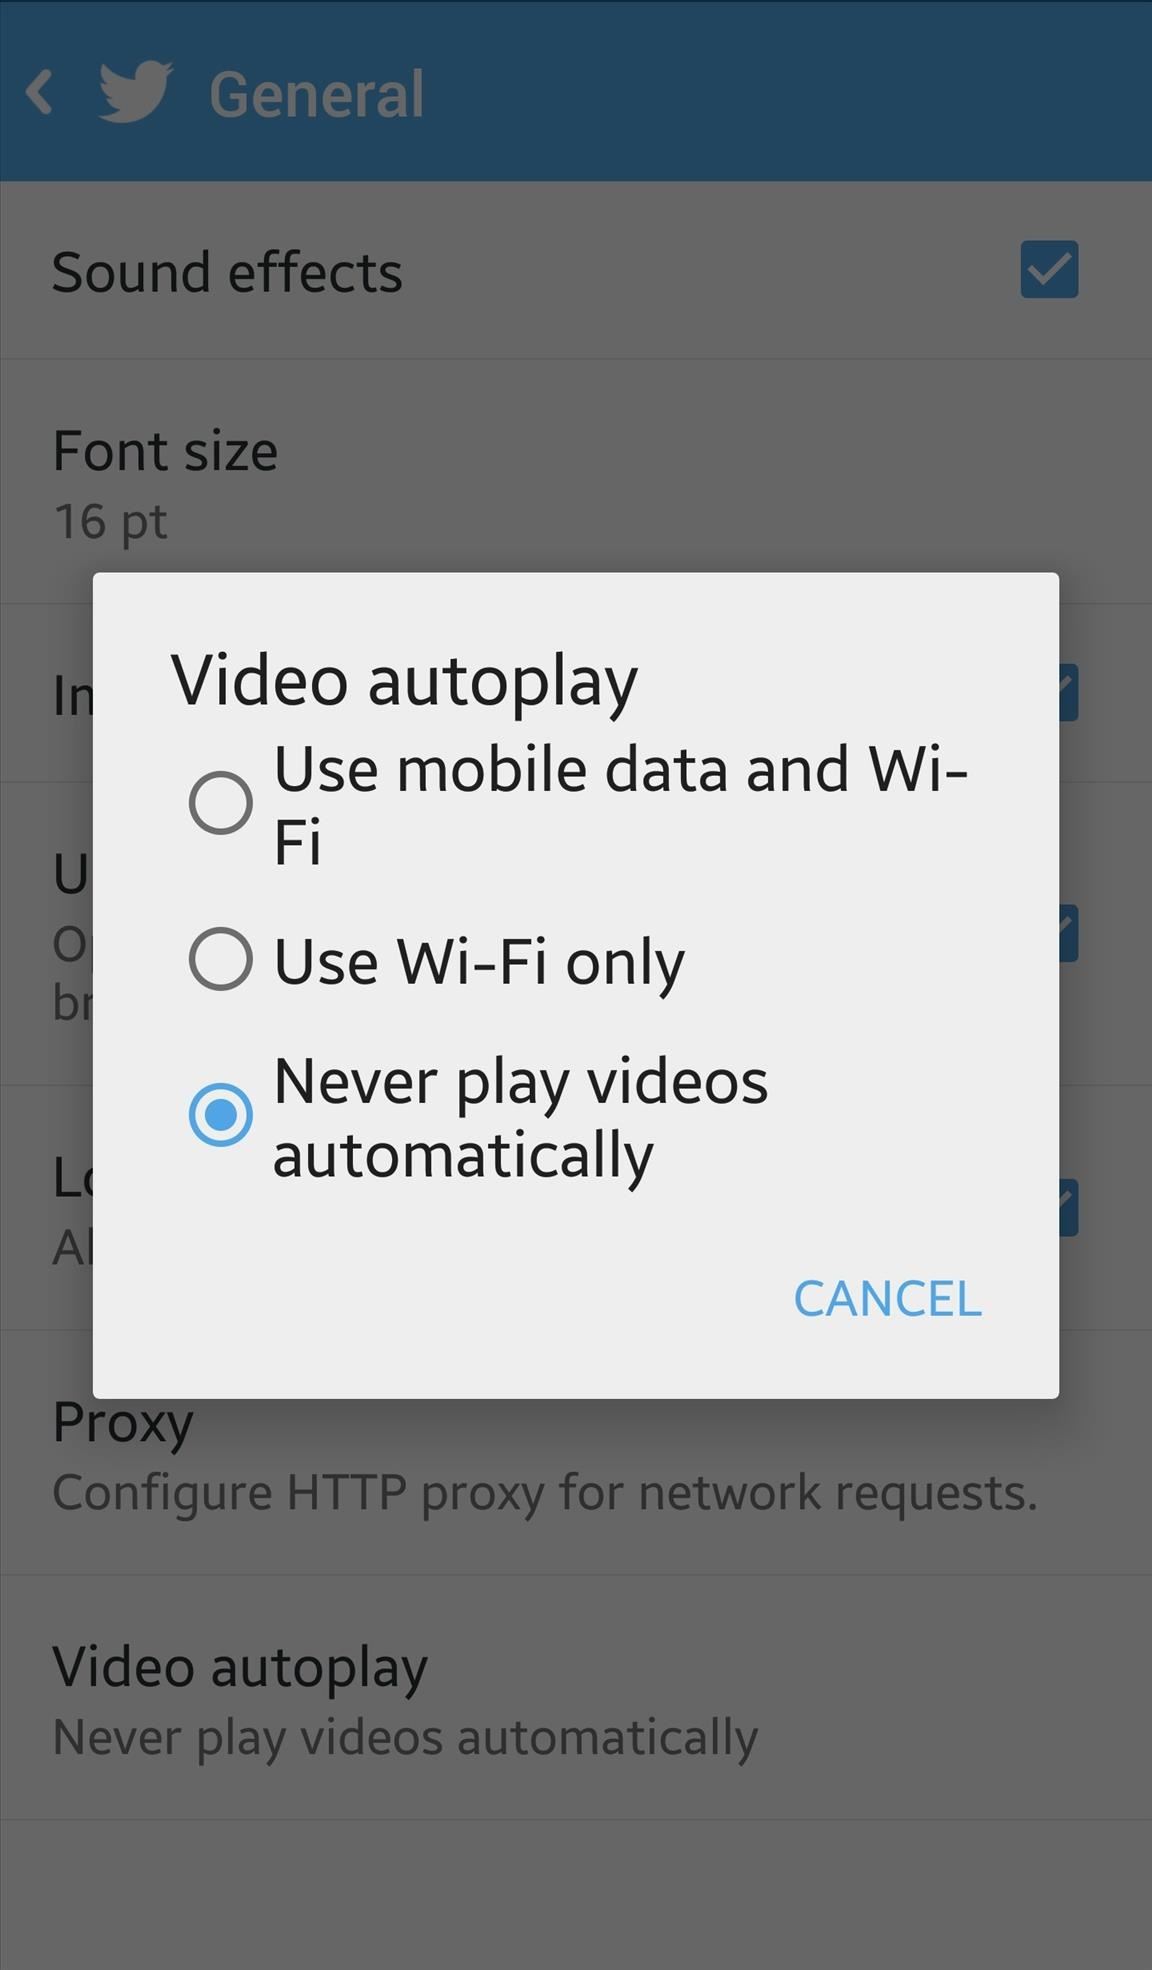 How to Disable Twitter's Annoying Autoplay Videos